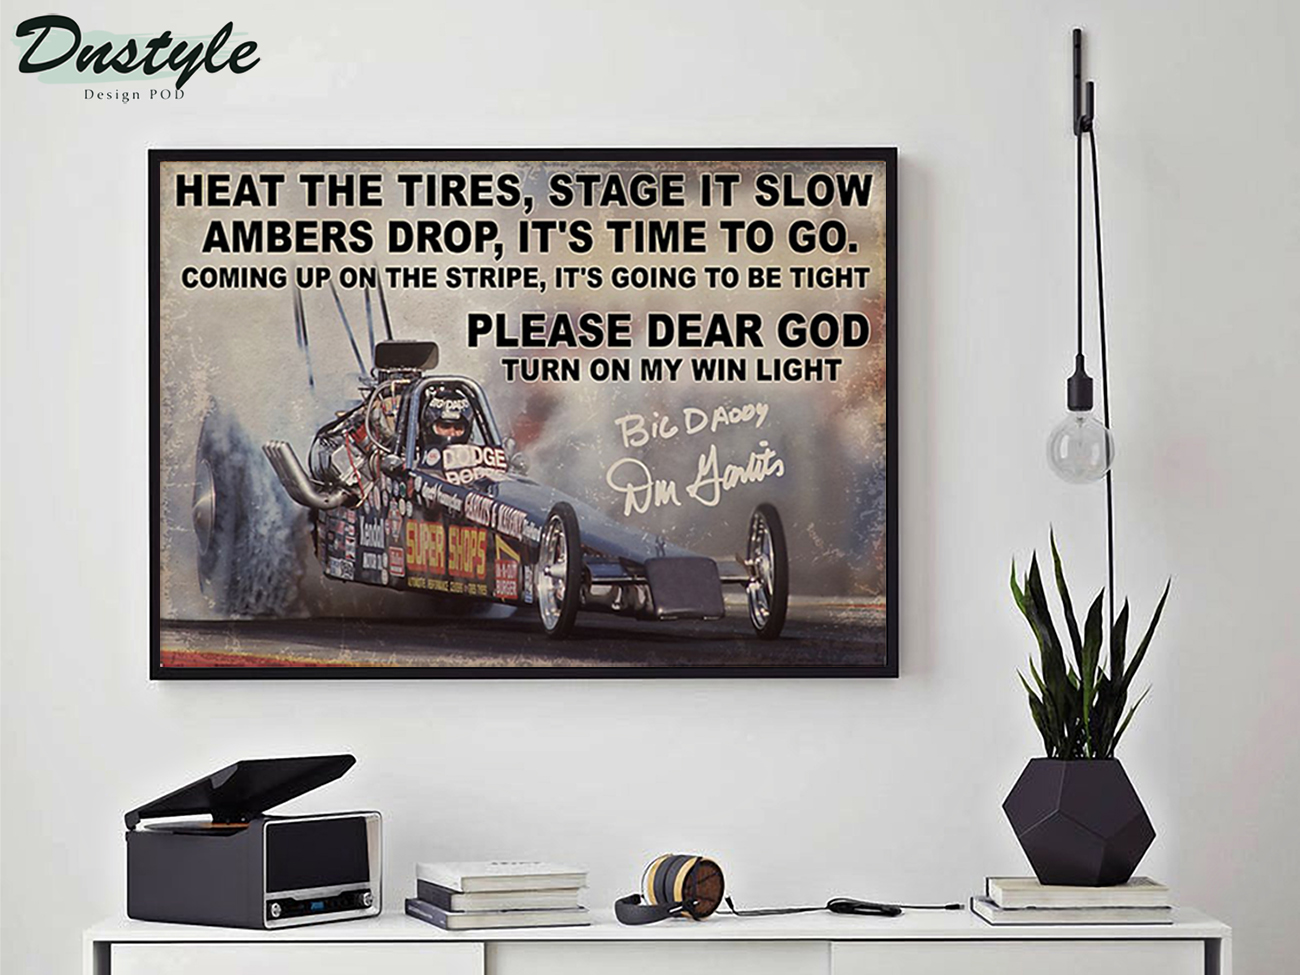 Drag Racing heat the tires stage it slow ambers drop poster A1